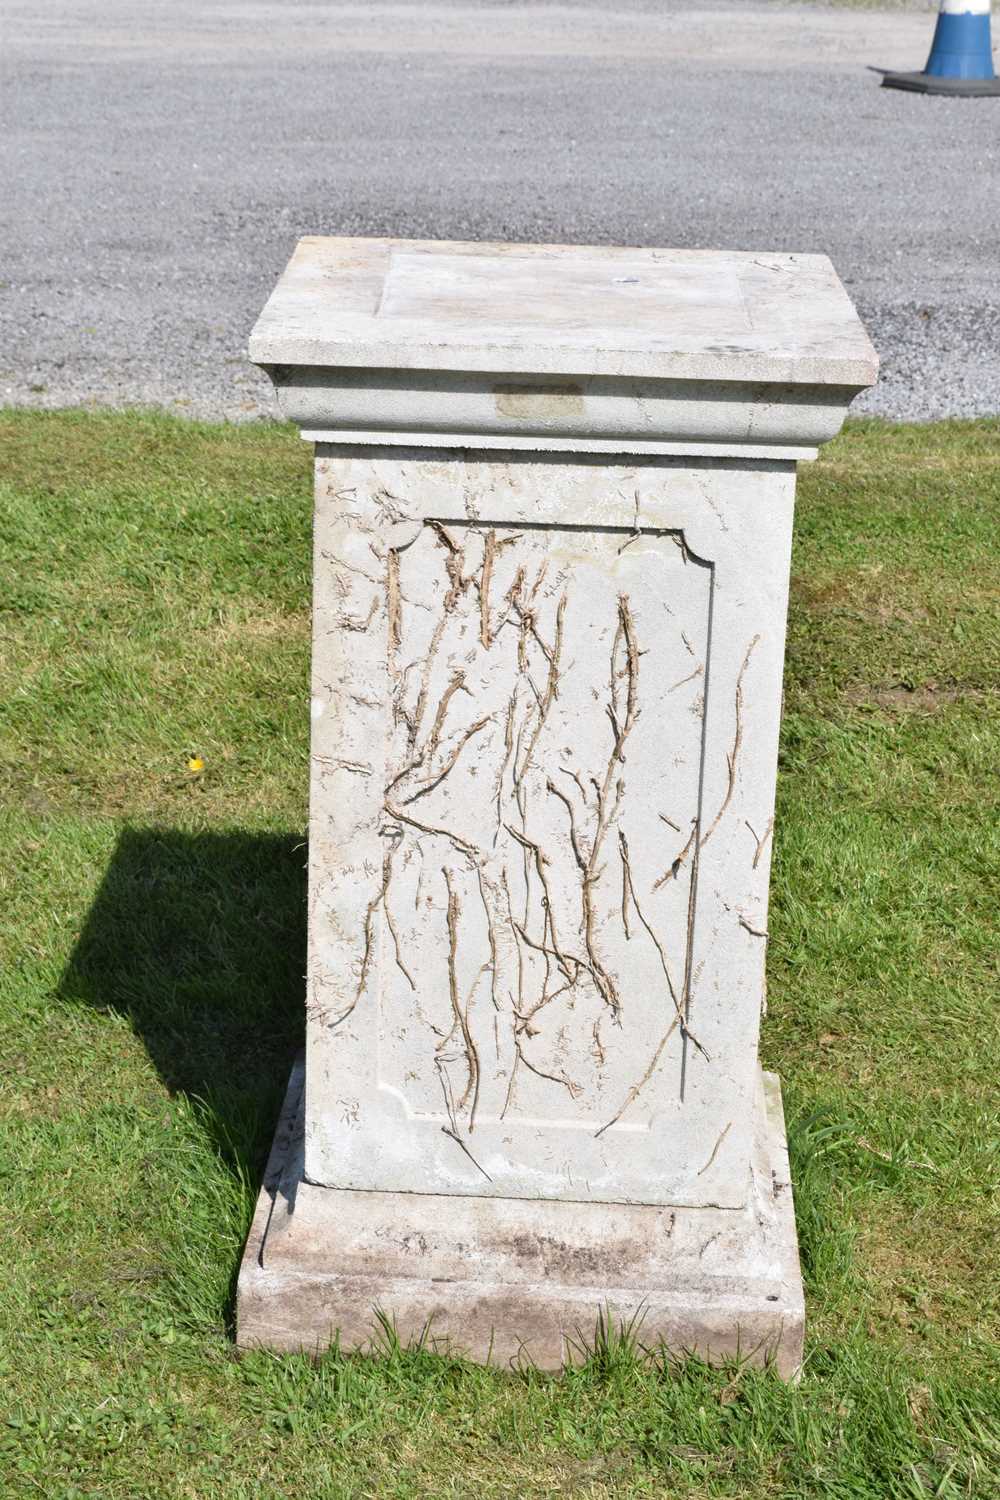 Composition stone garden urn and pedestal - Image 5 of 11